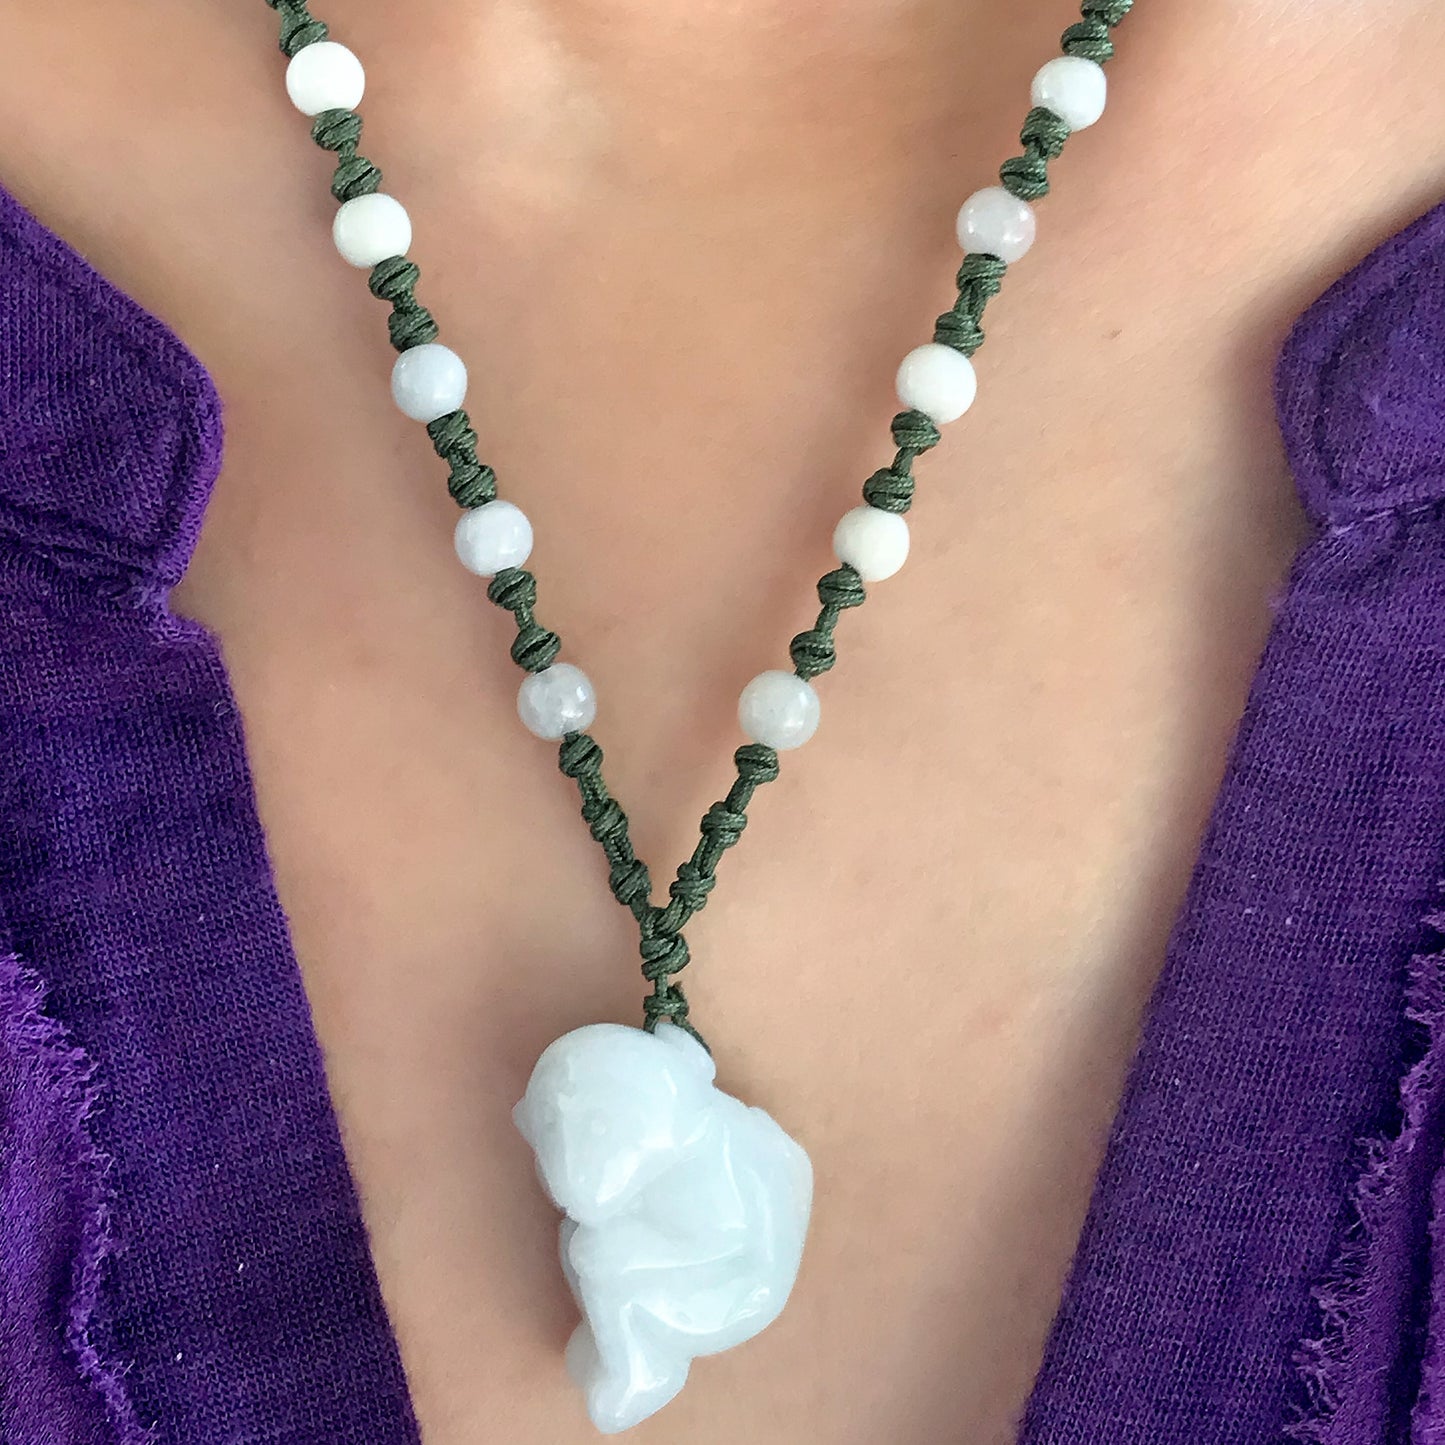 Look Great with a Monkey Chinese Zodiac Jade Pendant Necklace made with Olive Cord